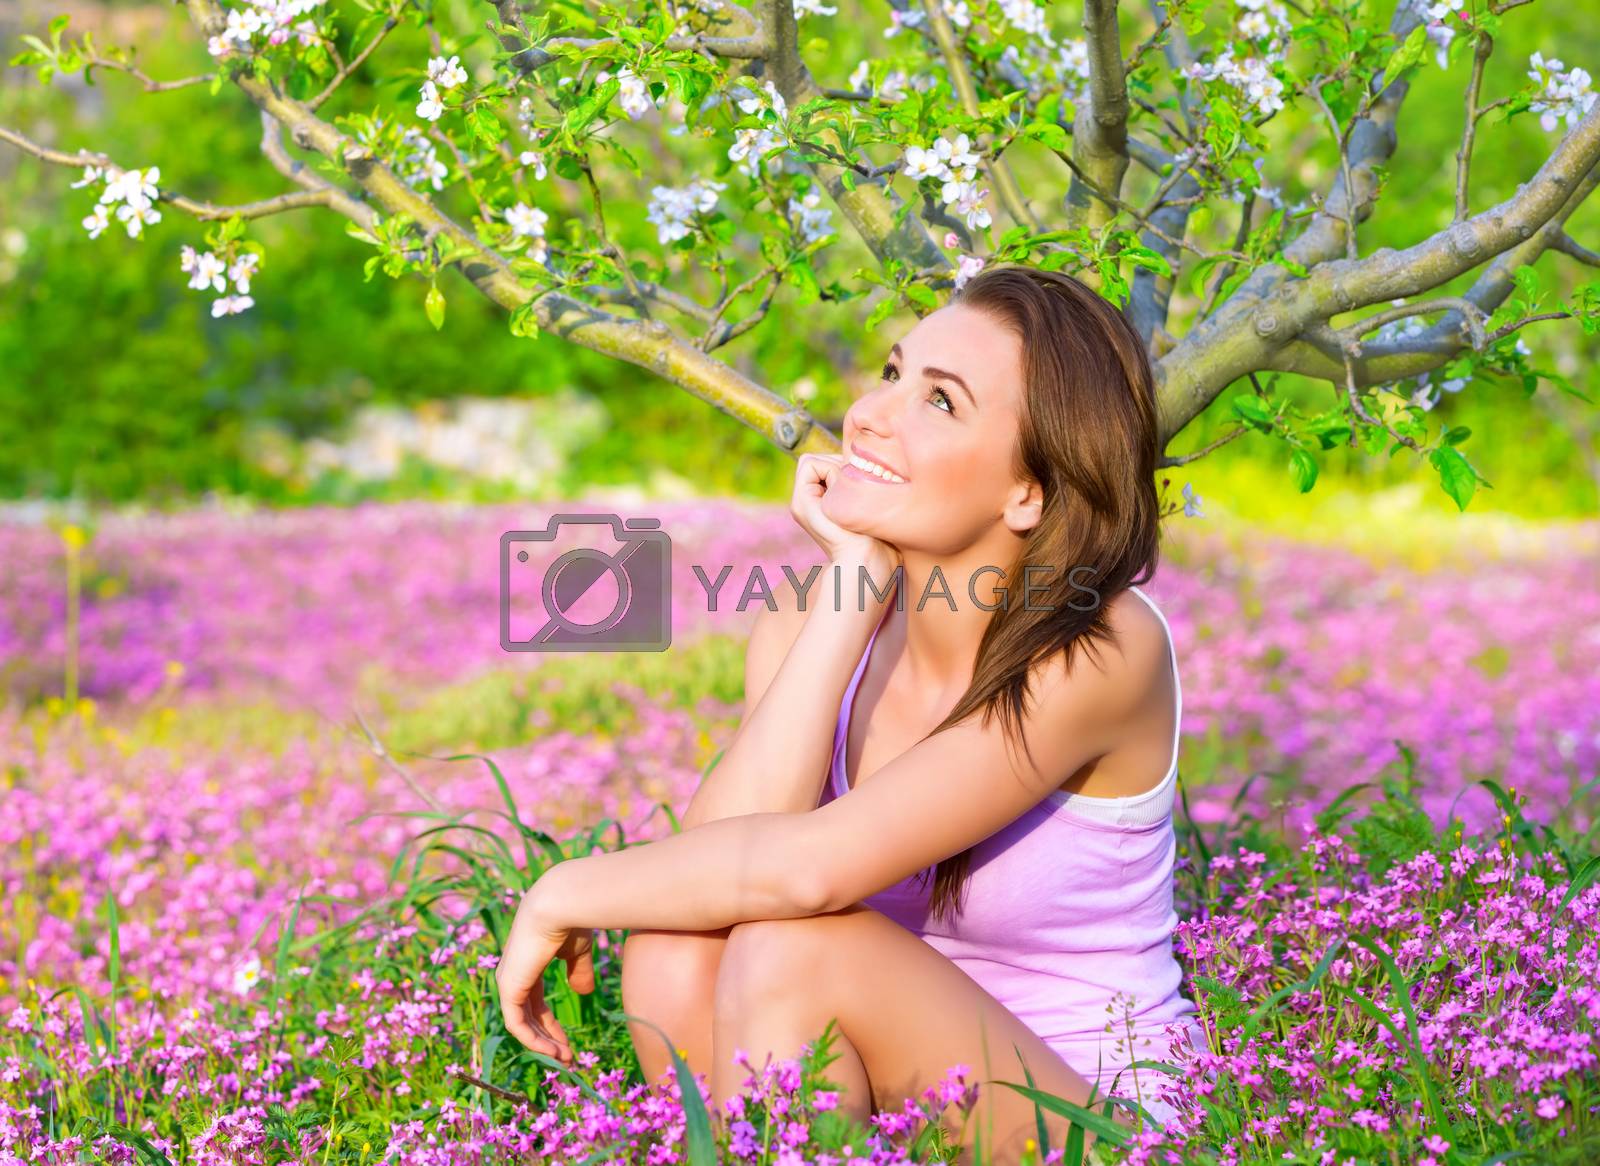 Royalty free image of Dreamy woman in blooming park by Anna_Omelchenko